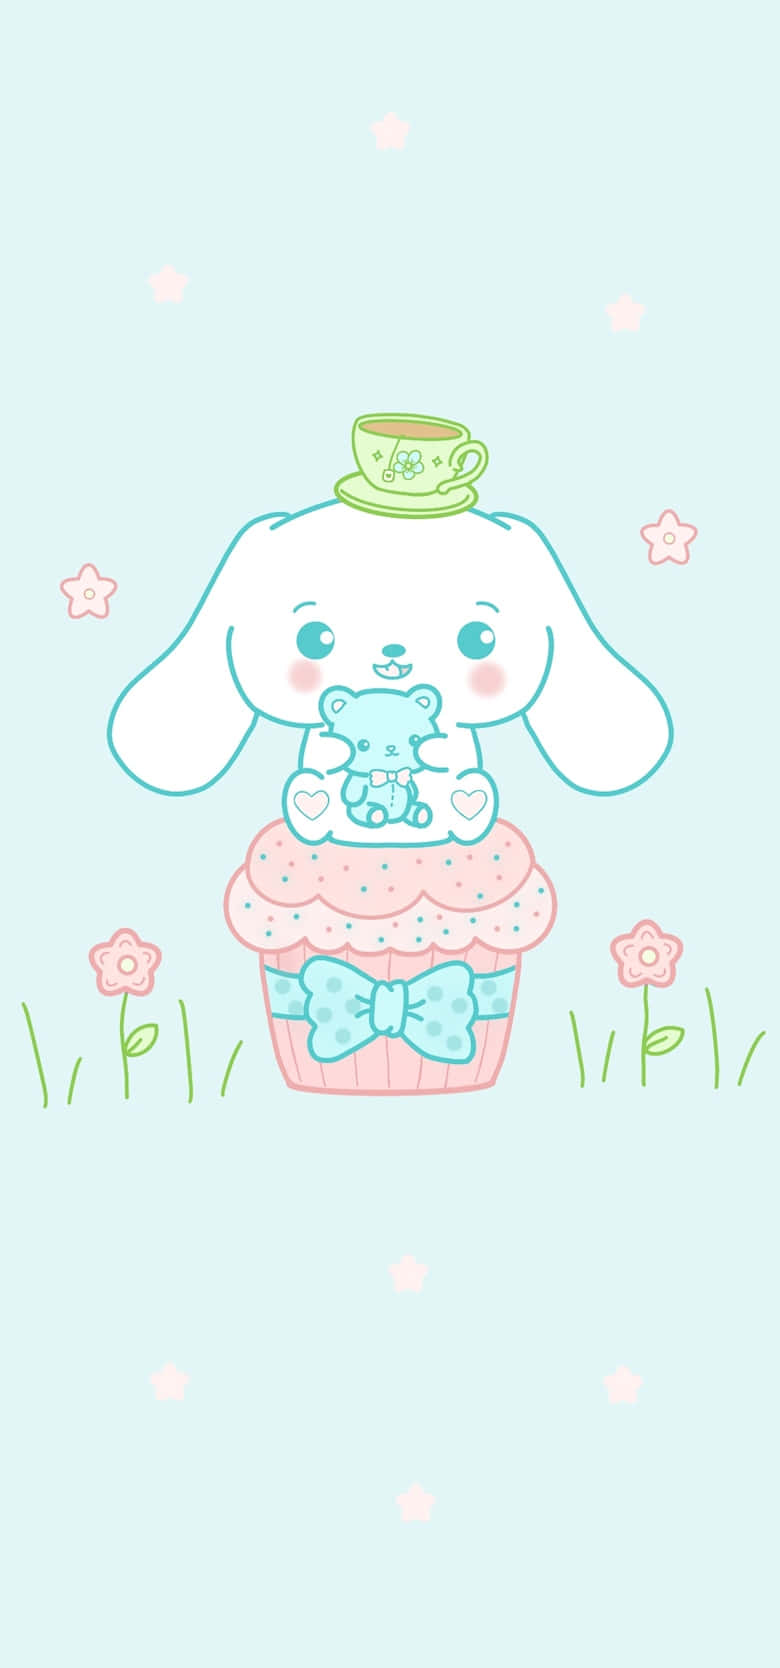 A Cute Bunny With A Cupcake On His Head Wallpaper